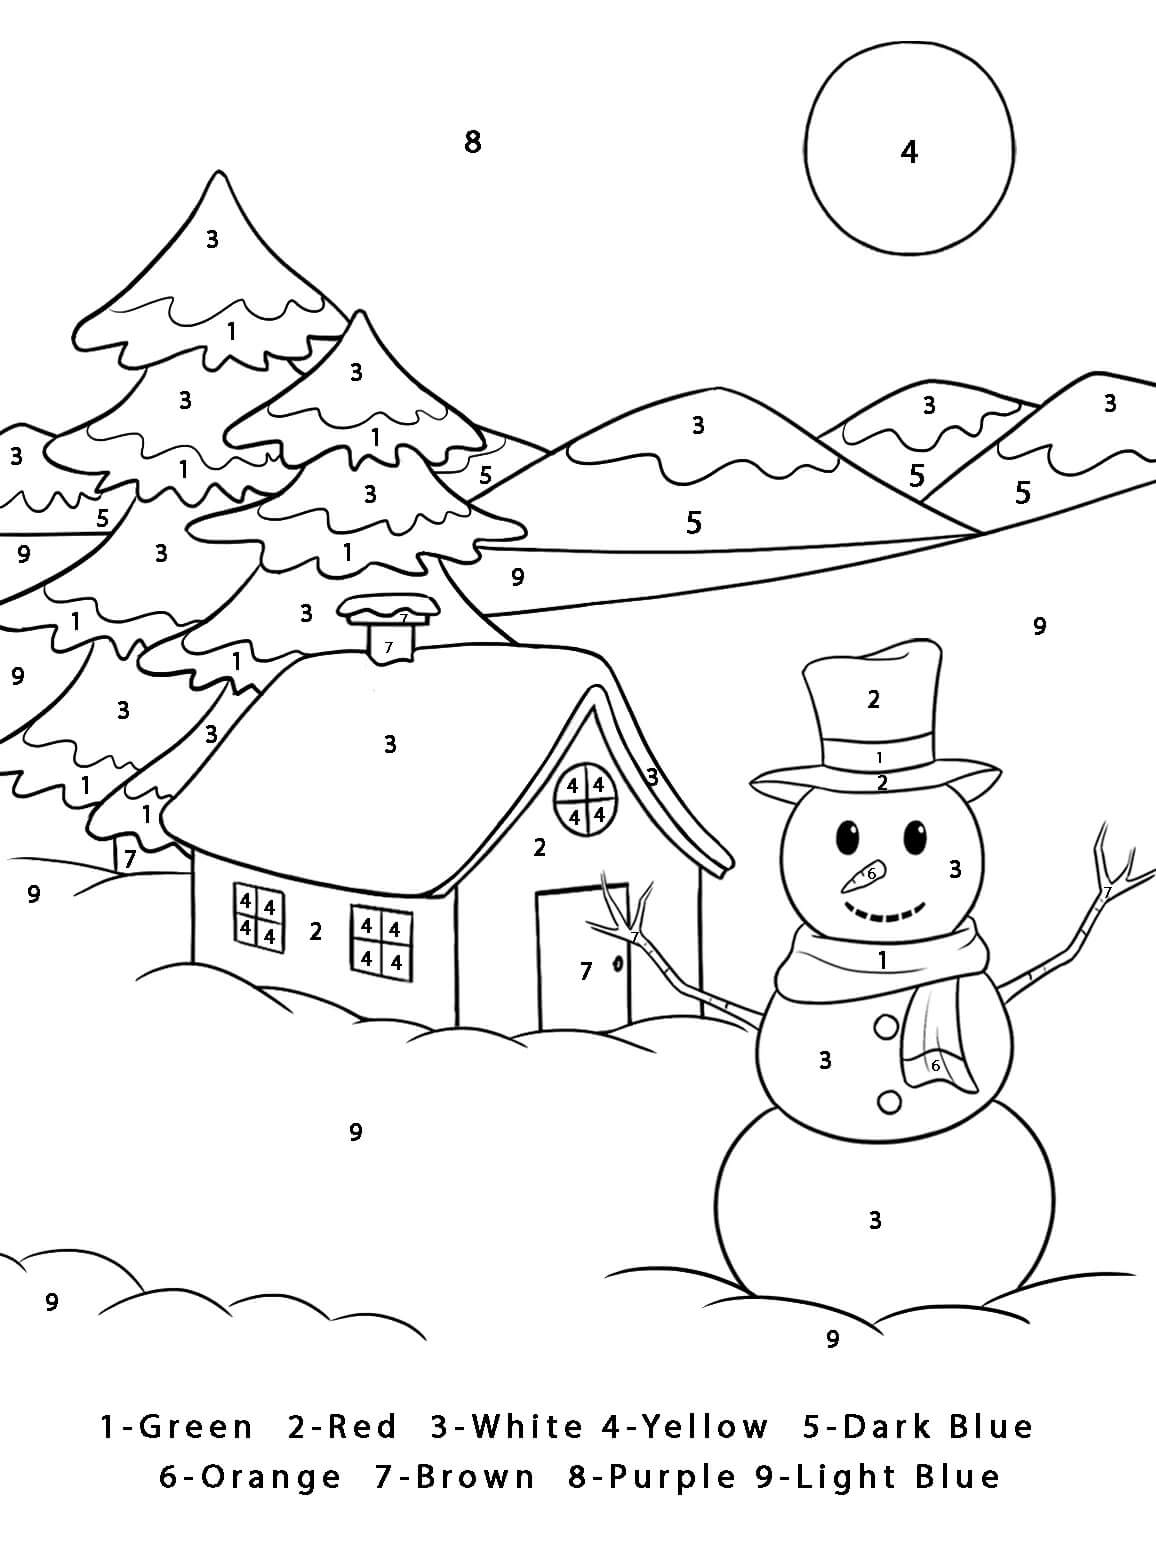 smiling-snowman-in-winter-color-by-number-coloring-page-download